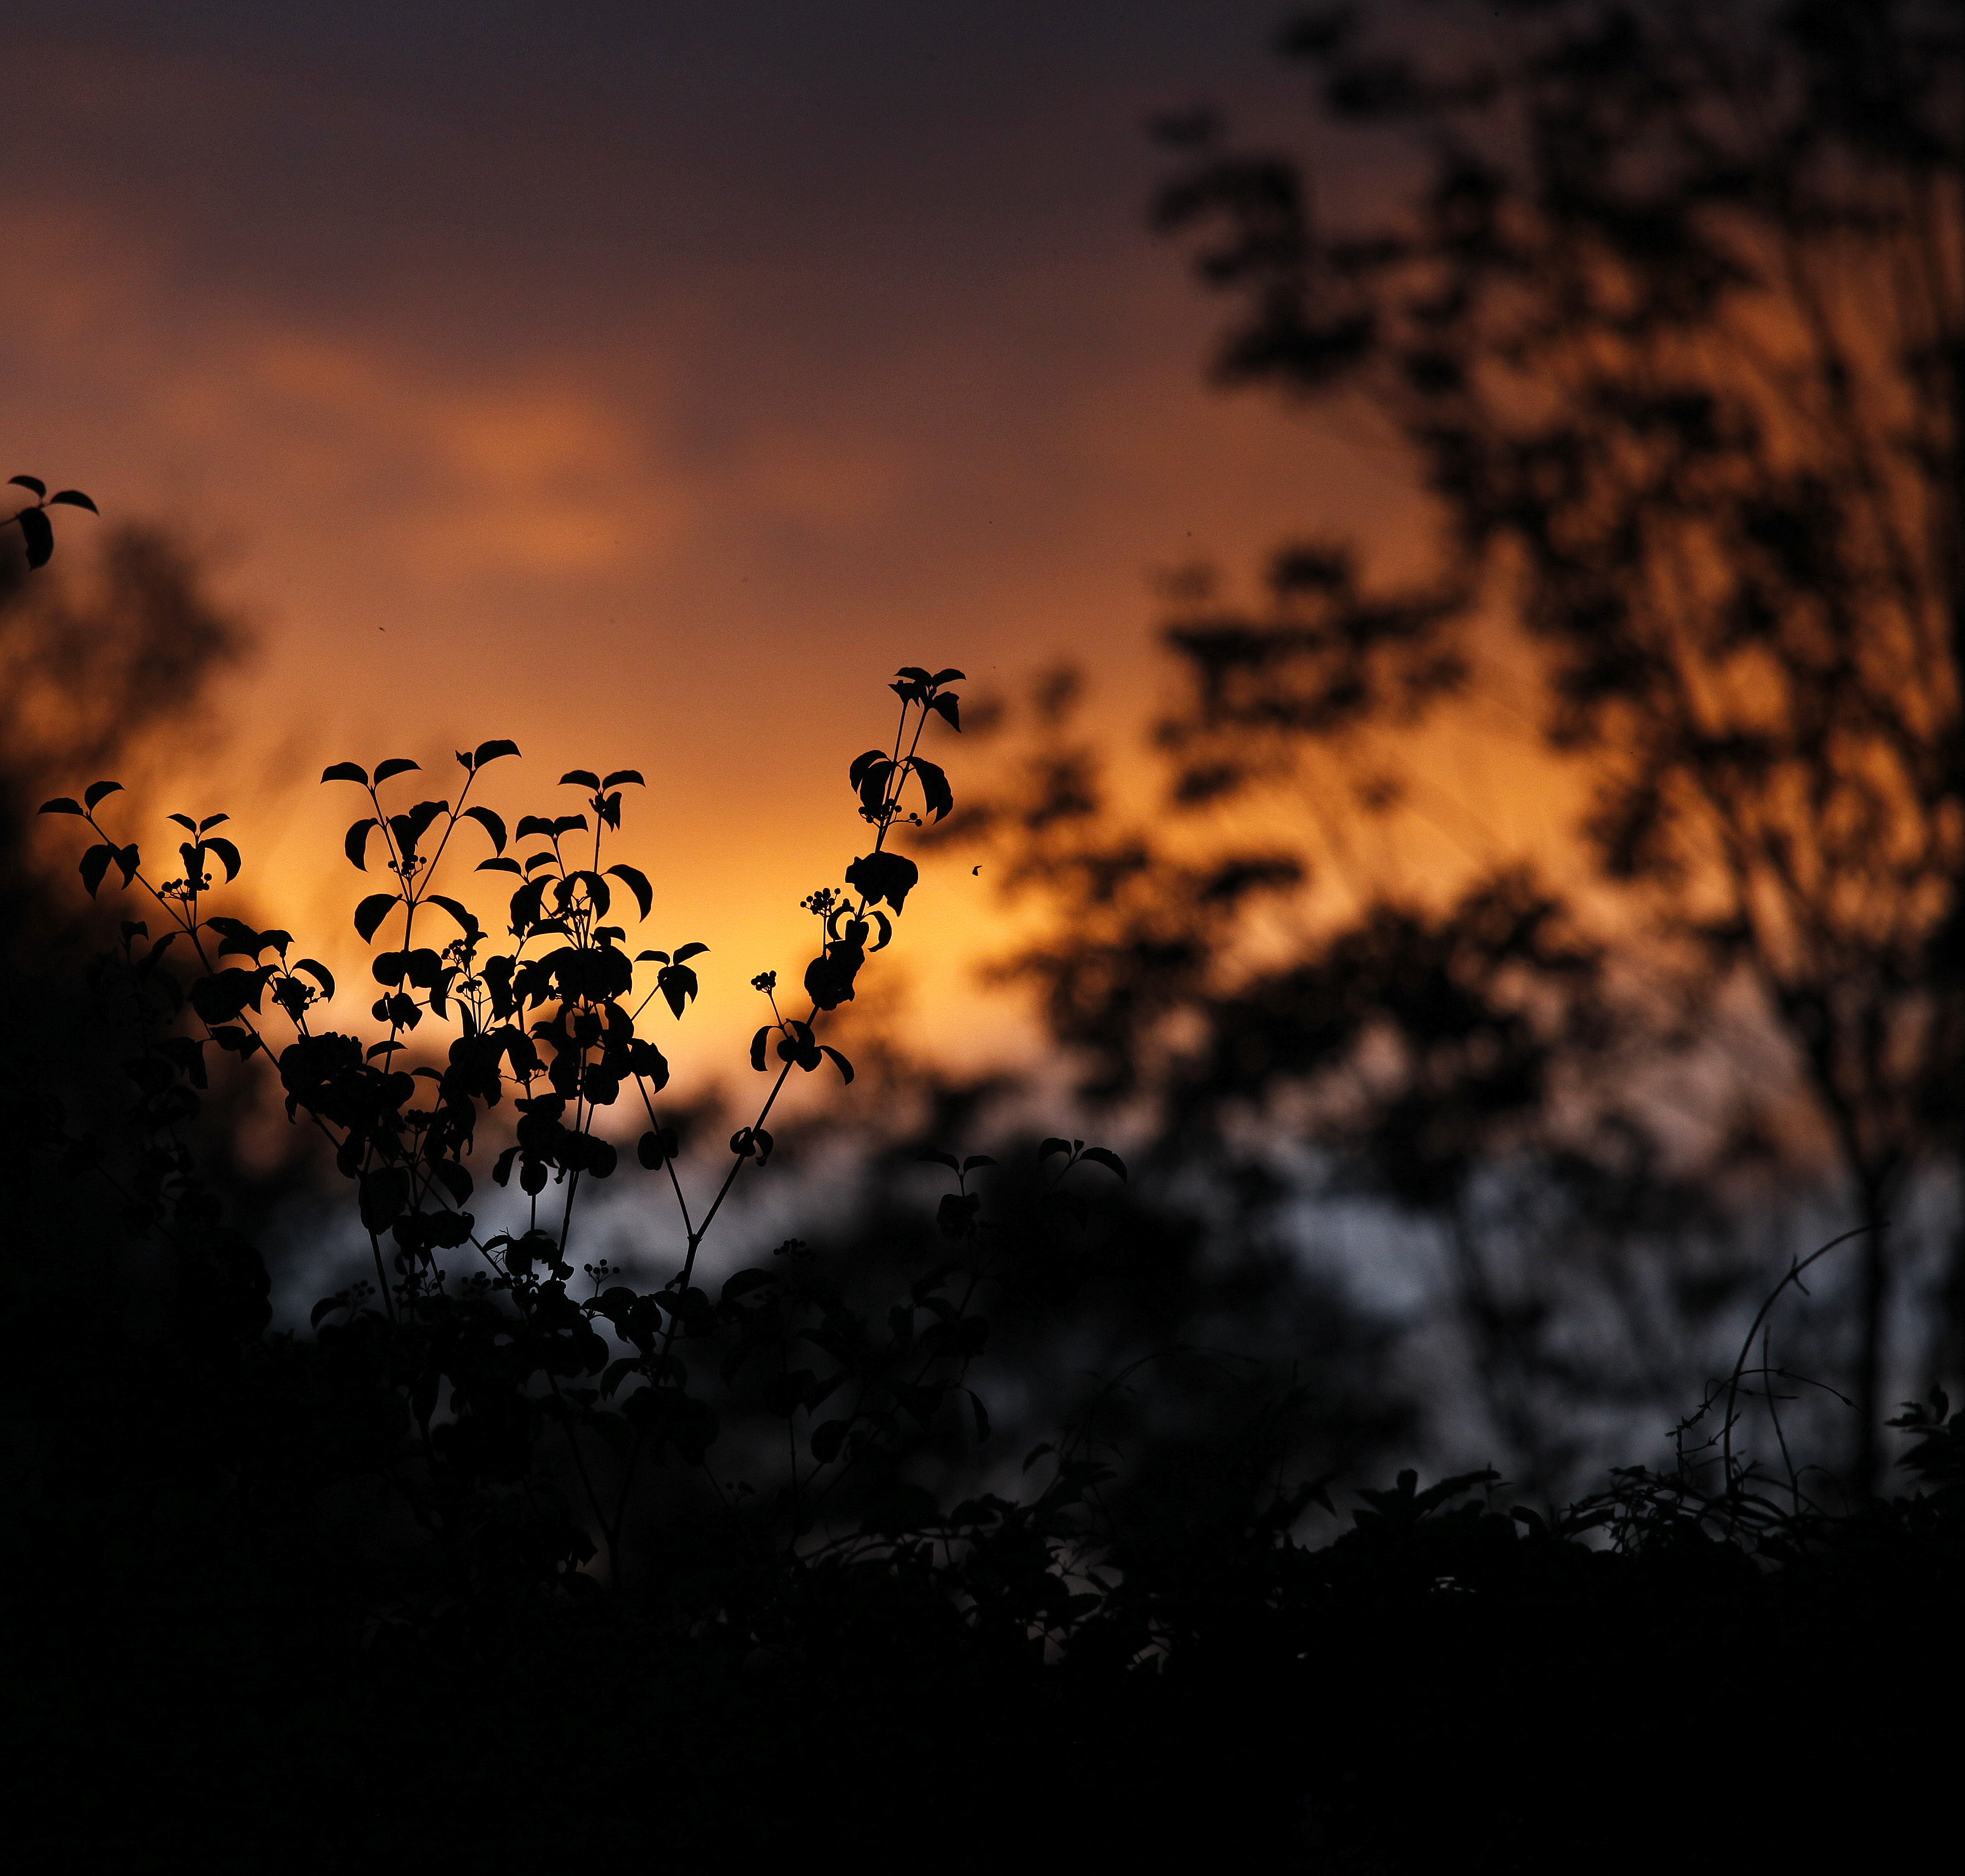 dark, sunset, silhouettes, leaves, outlines, plants 2160p